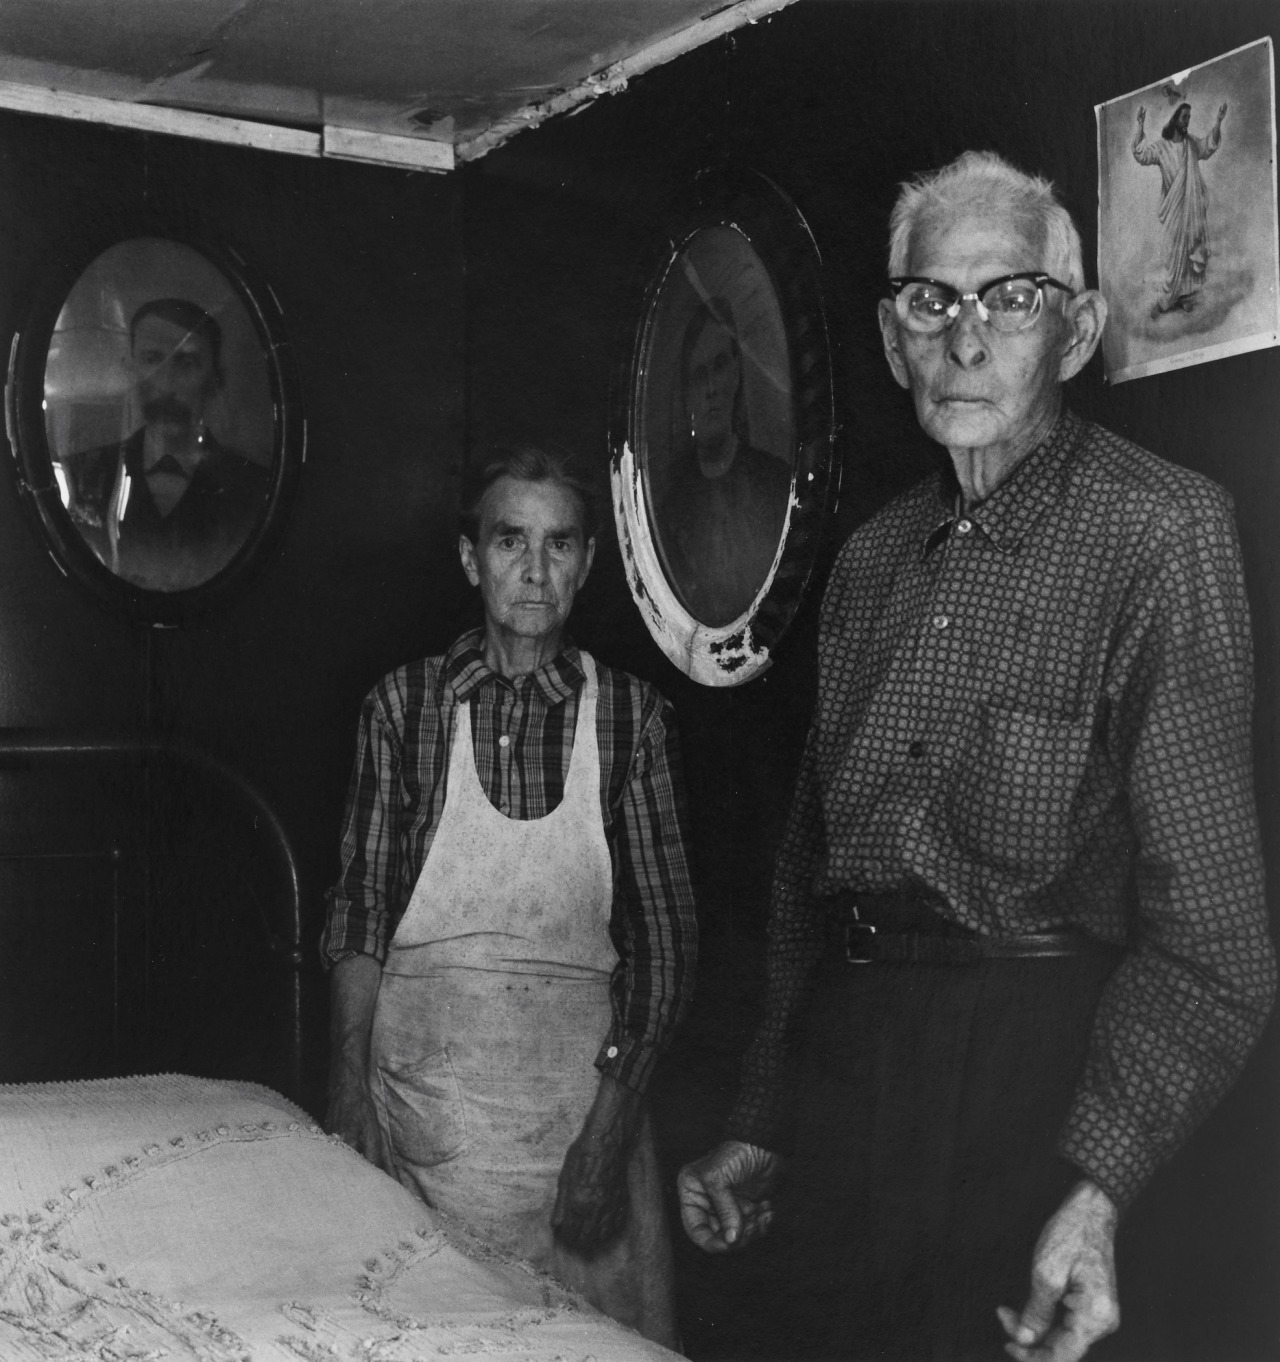 agelessphotography:
“Untitled (Old couple in bedroom) from the Appalachia, 1962-1987 series, Milton Rogovin, 1970”